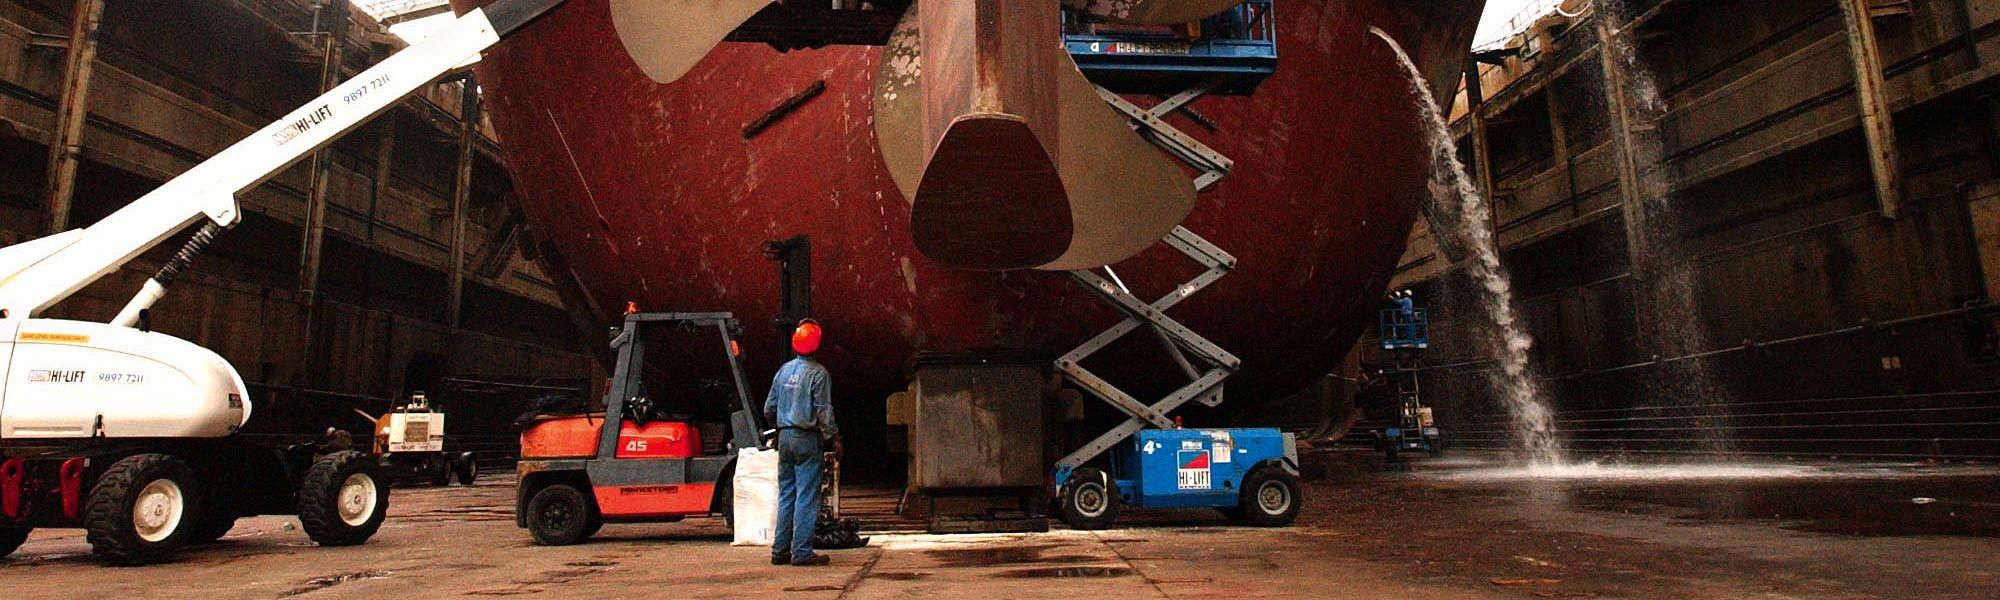 Large dry docked ship getting repairs